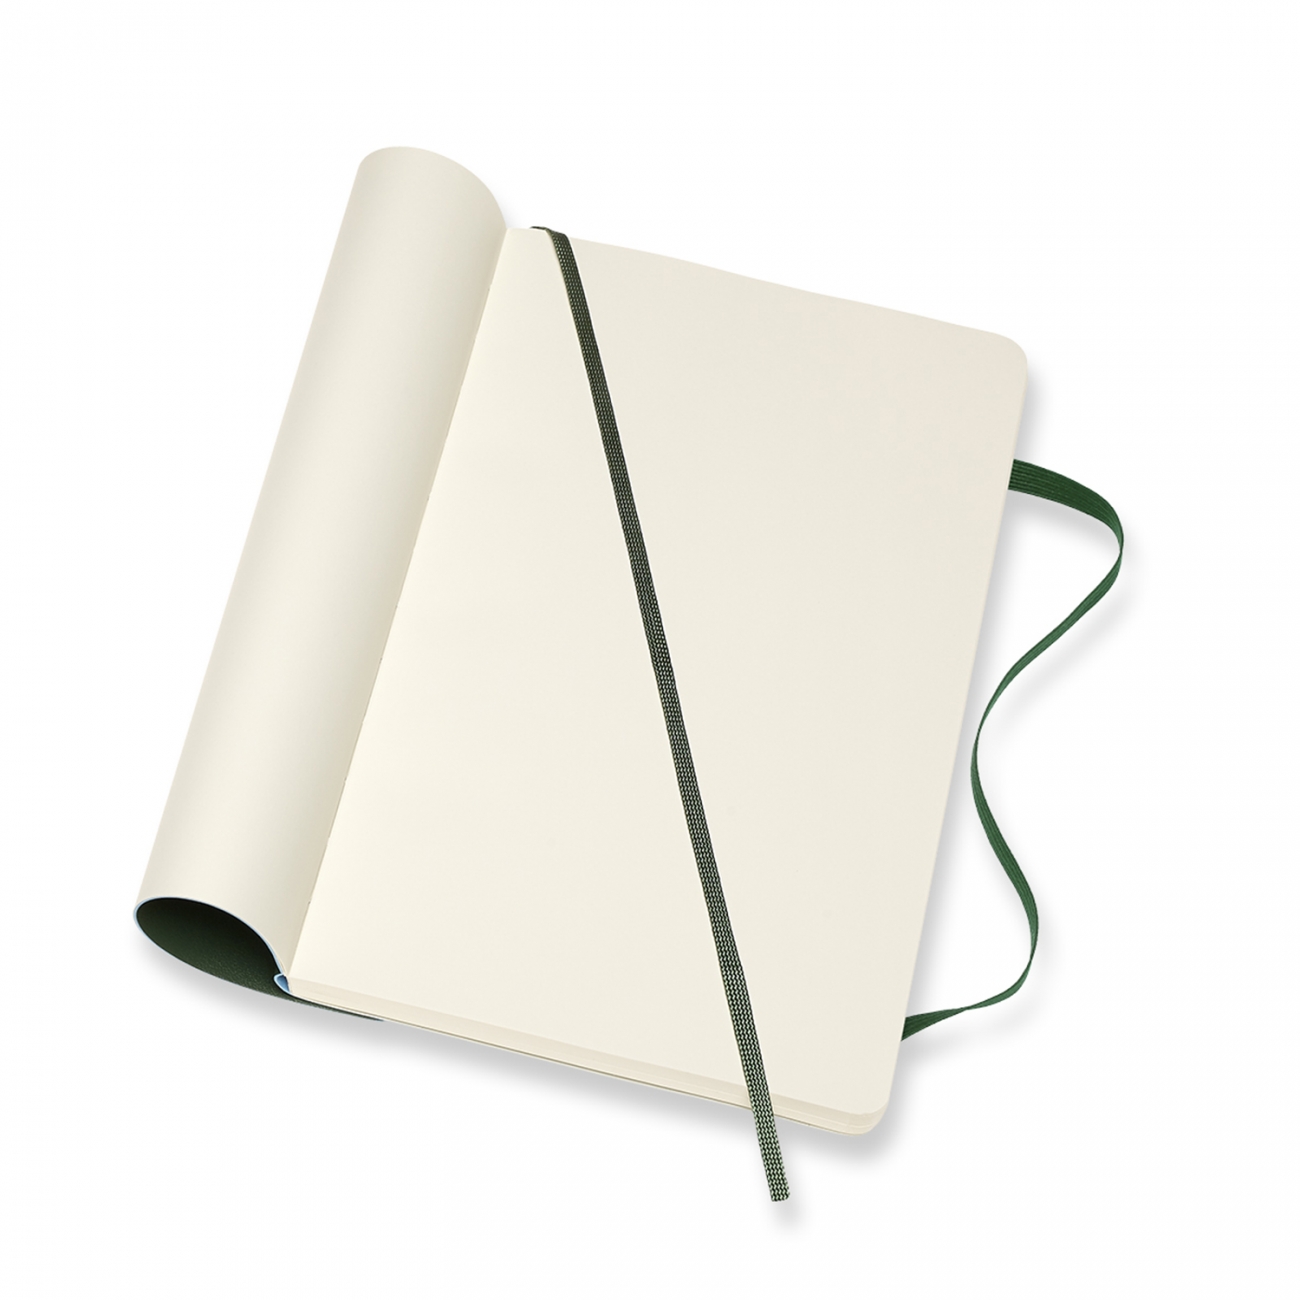 CLASSIC SOFT COVER NOTEBOOK - PLAIN - LARGE - MYRTLE GREEN